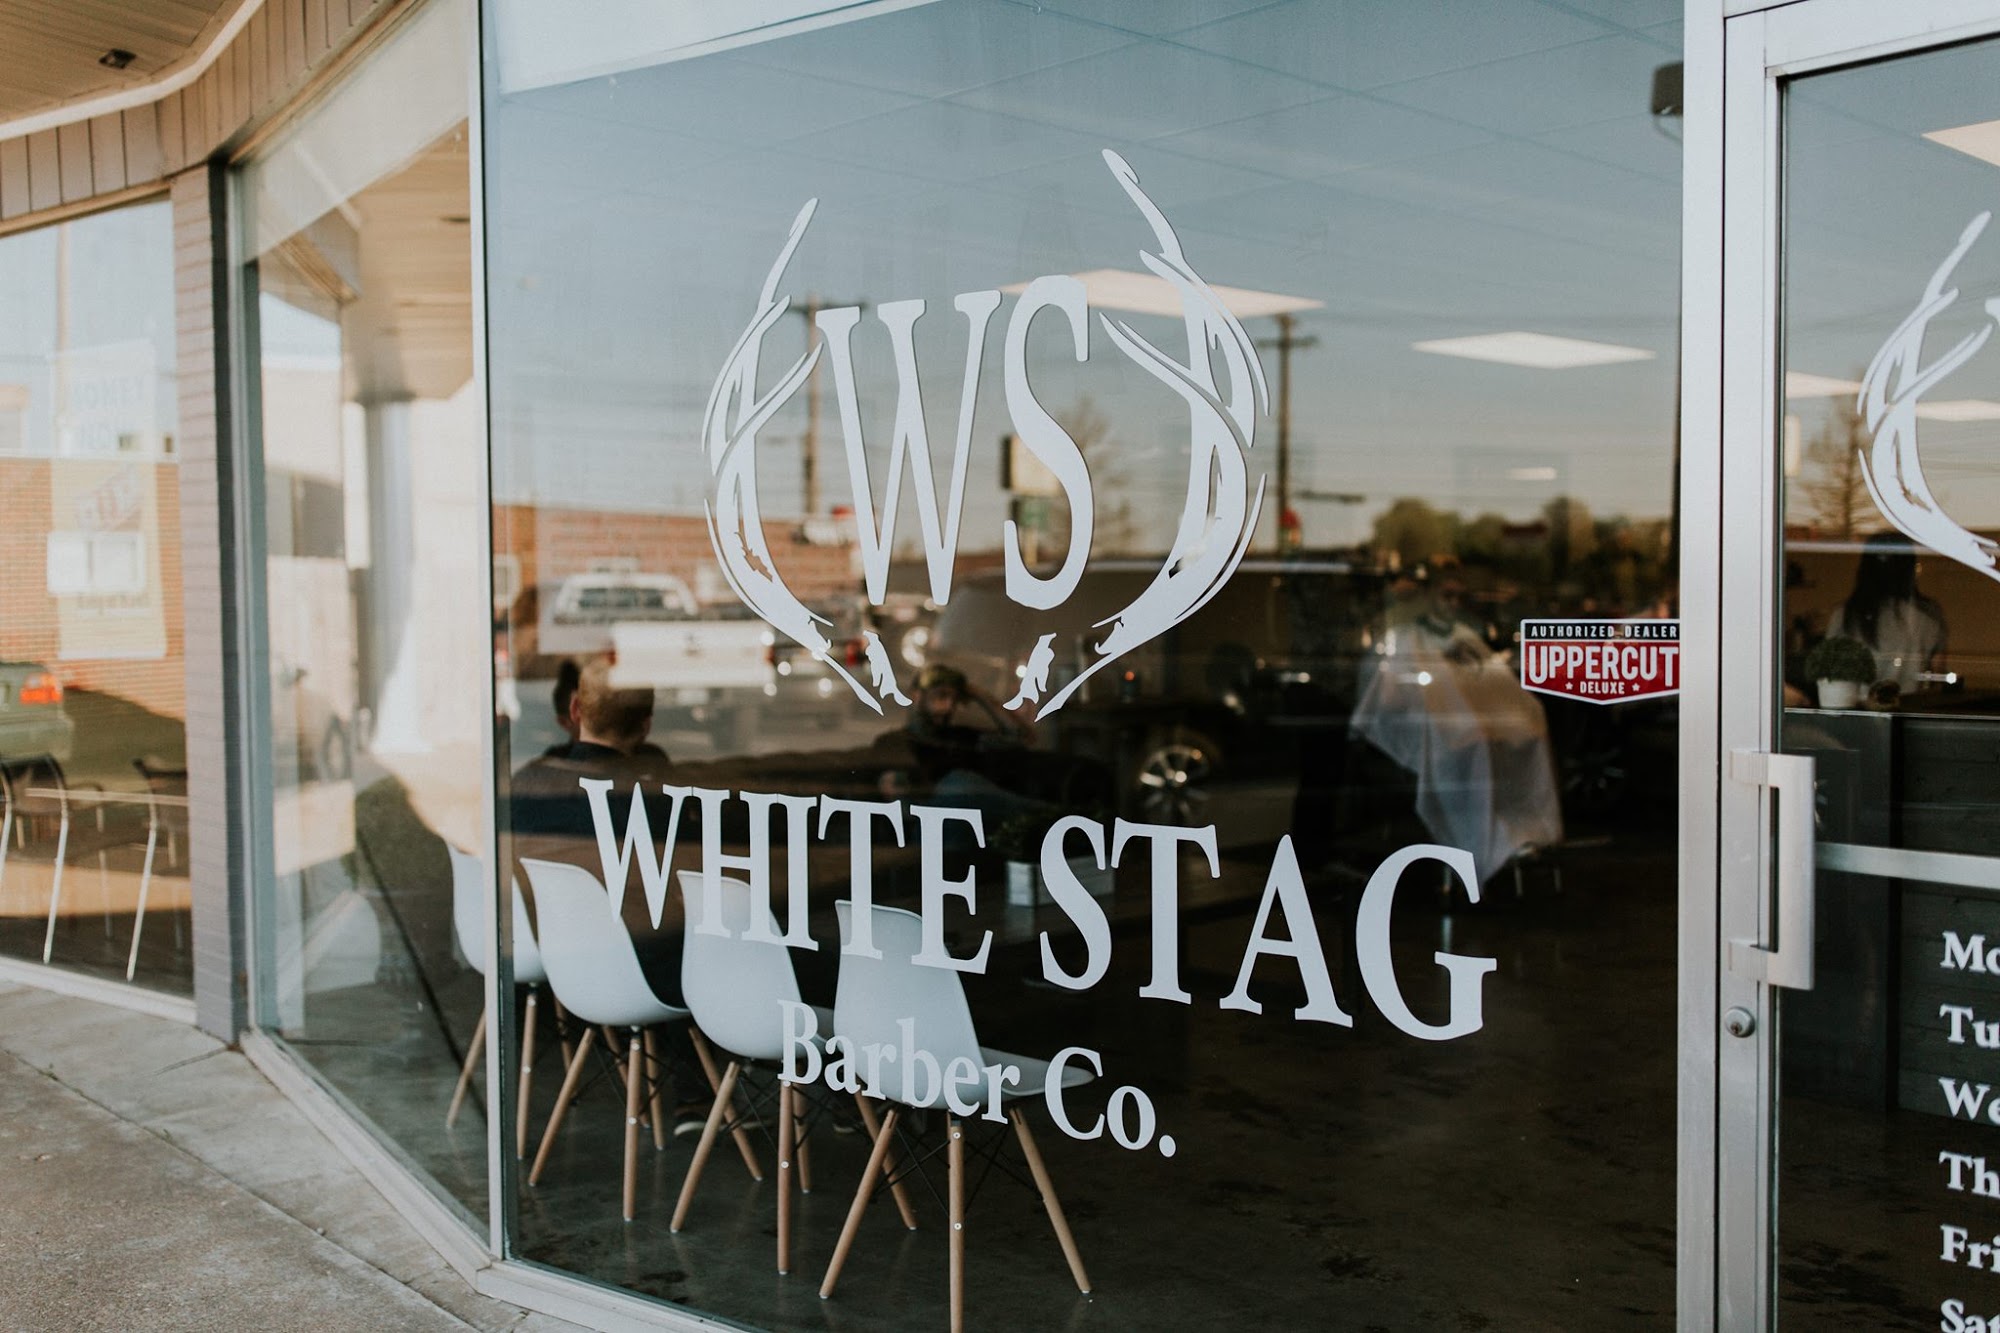 White Stag Barber Co.